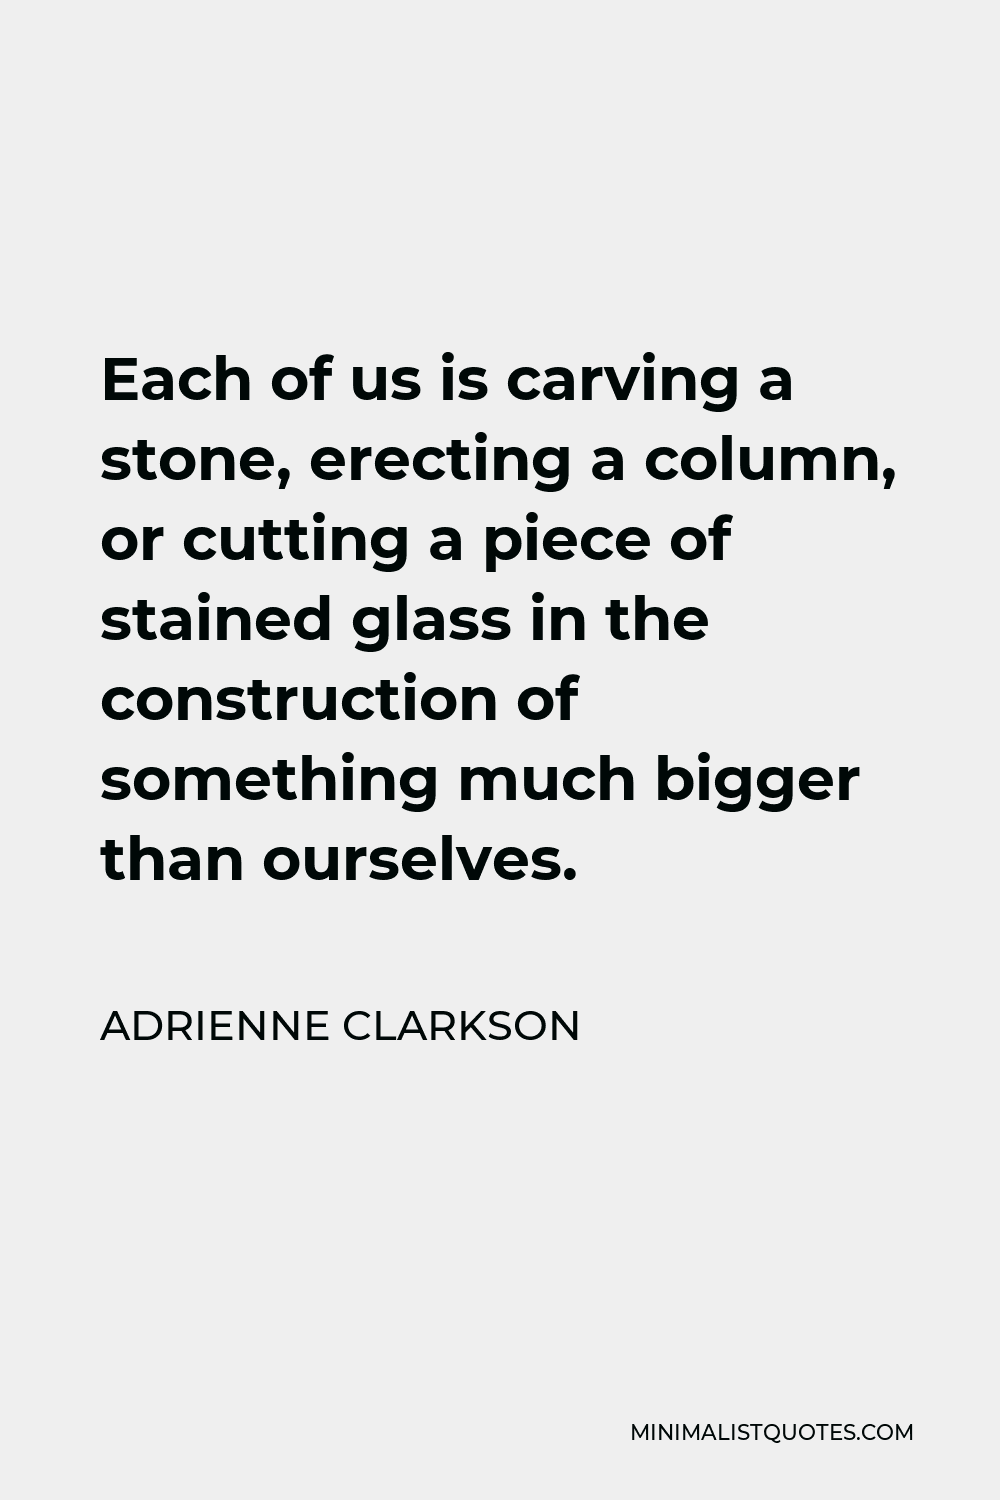 Adrienne Clarkson Quote - Each of us is carving a stone, erecting a column, or cutting a piece of stained glass in the construction of something much bigger than ourselves.